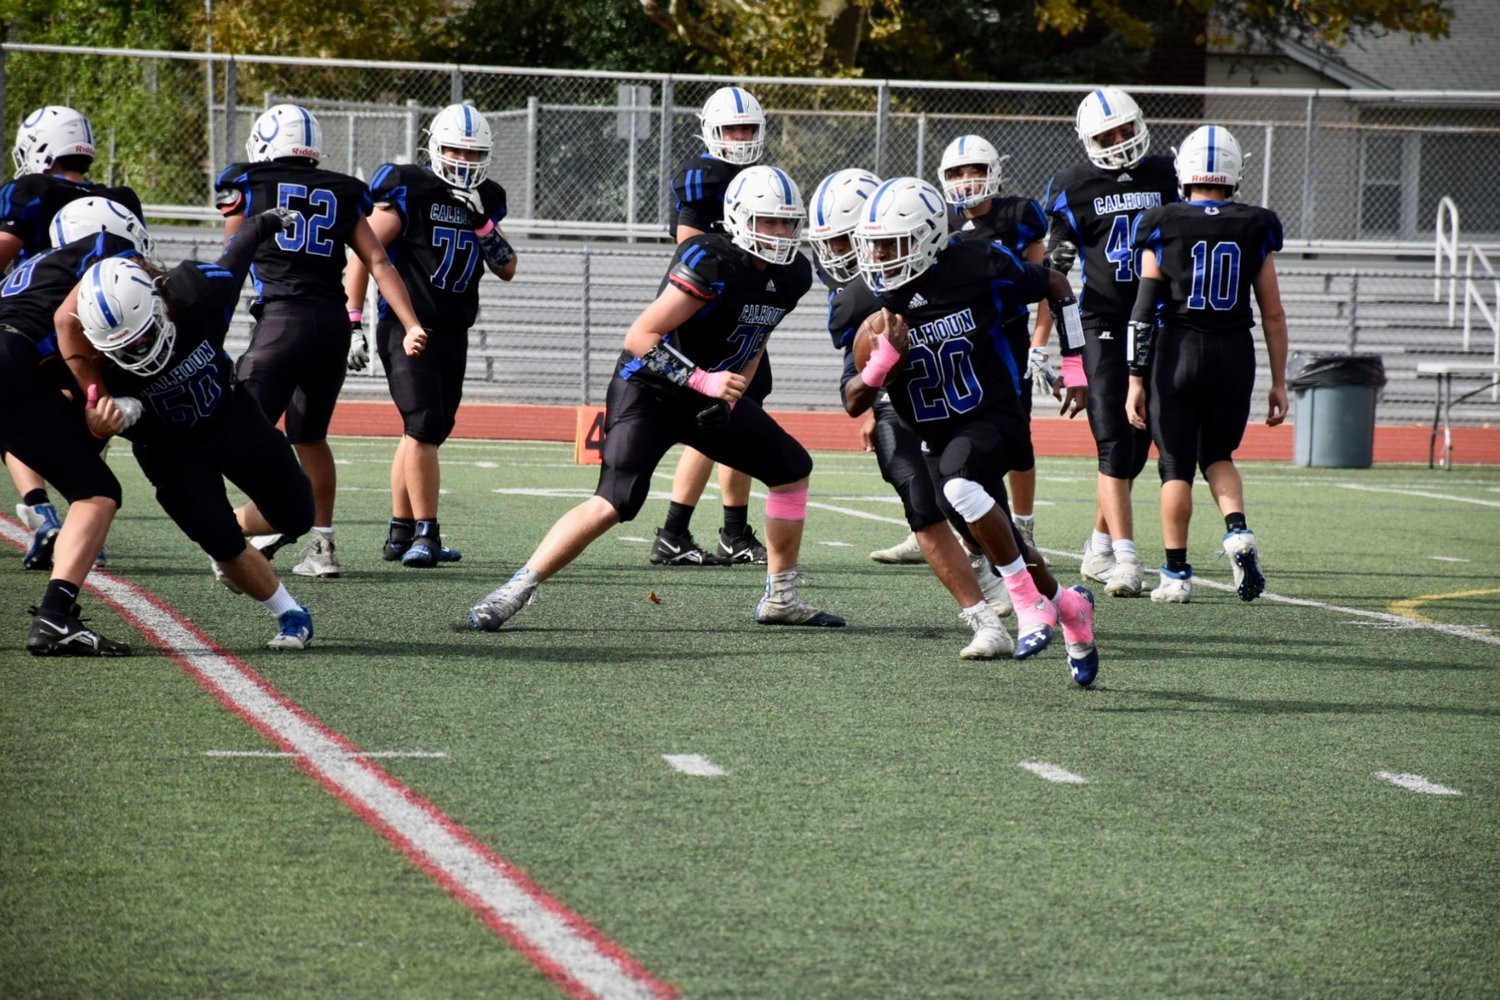 The Colts ran plays ahead of their matchup against Glen Cove at their Oct. 23 homecoming game.